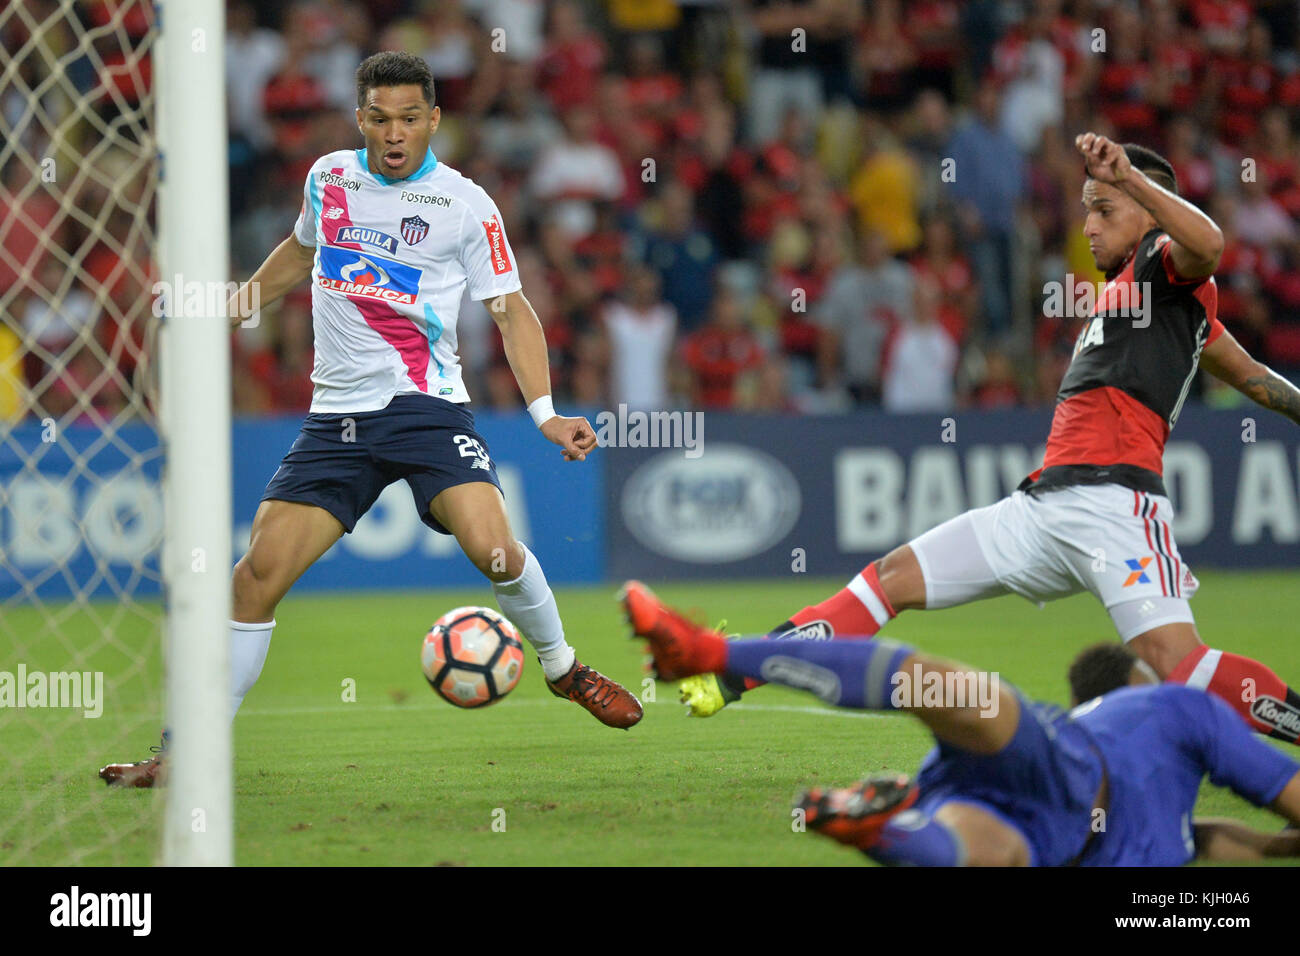 Rio De Janeiro, Brazil. 23rd Nov, 2017. Teófilo Gutiérrez scored a goal in this match during Flamengo vs. Junior of Barranquilla held in Maracanã for the first game of the semifinal of the South American Cup in Rio de Janeiro, RJ. Credit: Celso Pupo/FotoArena/Alamy Live News Stock Photo